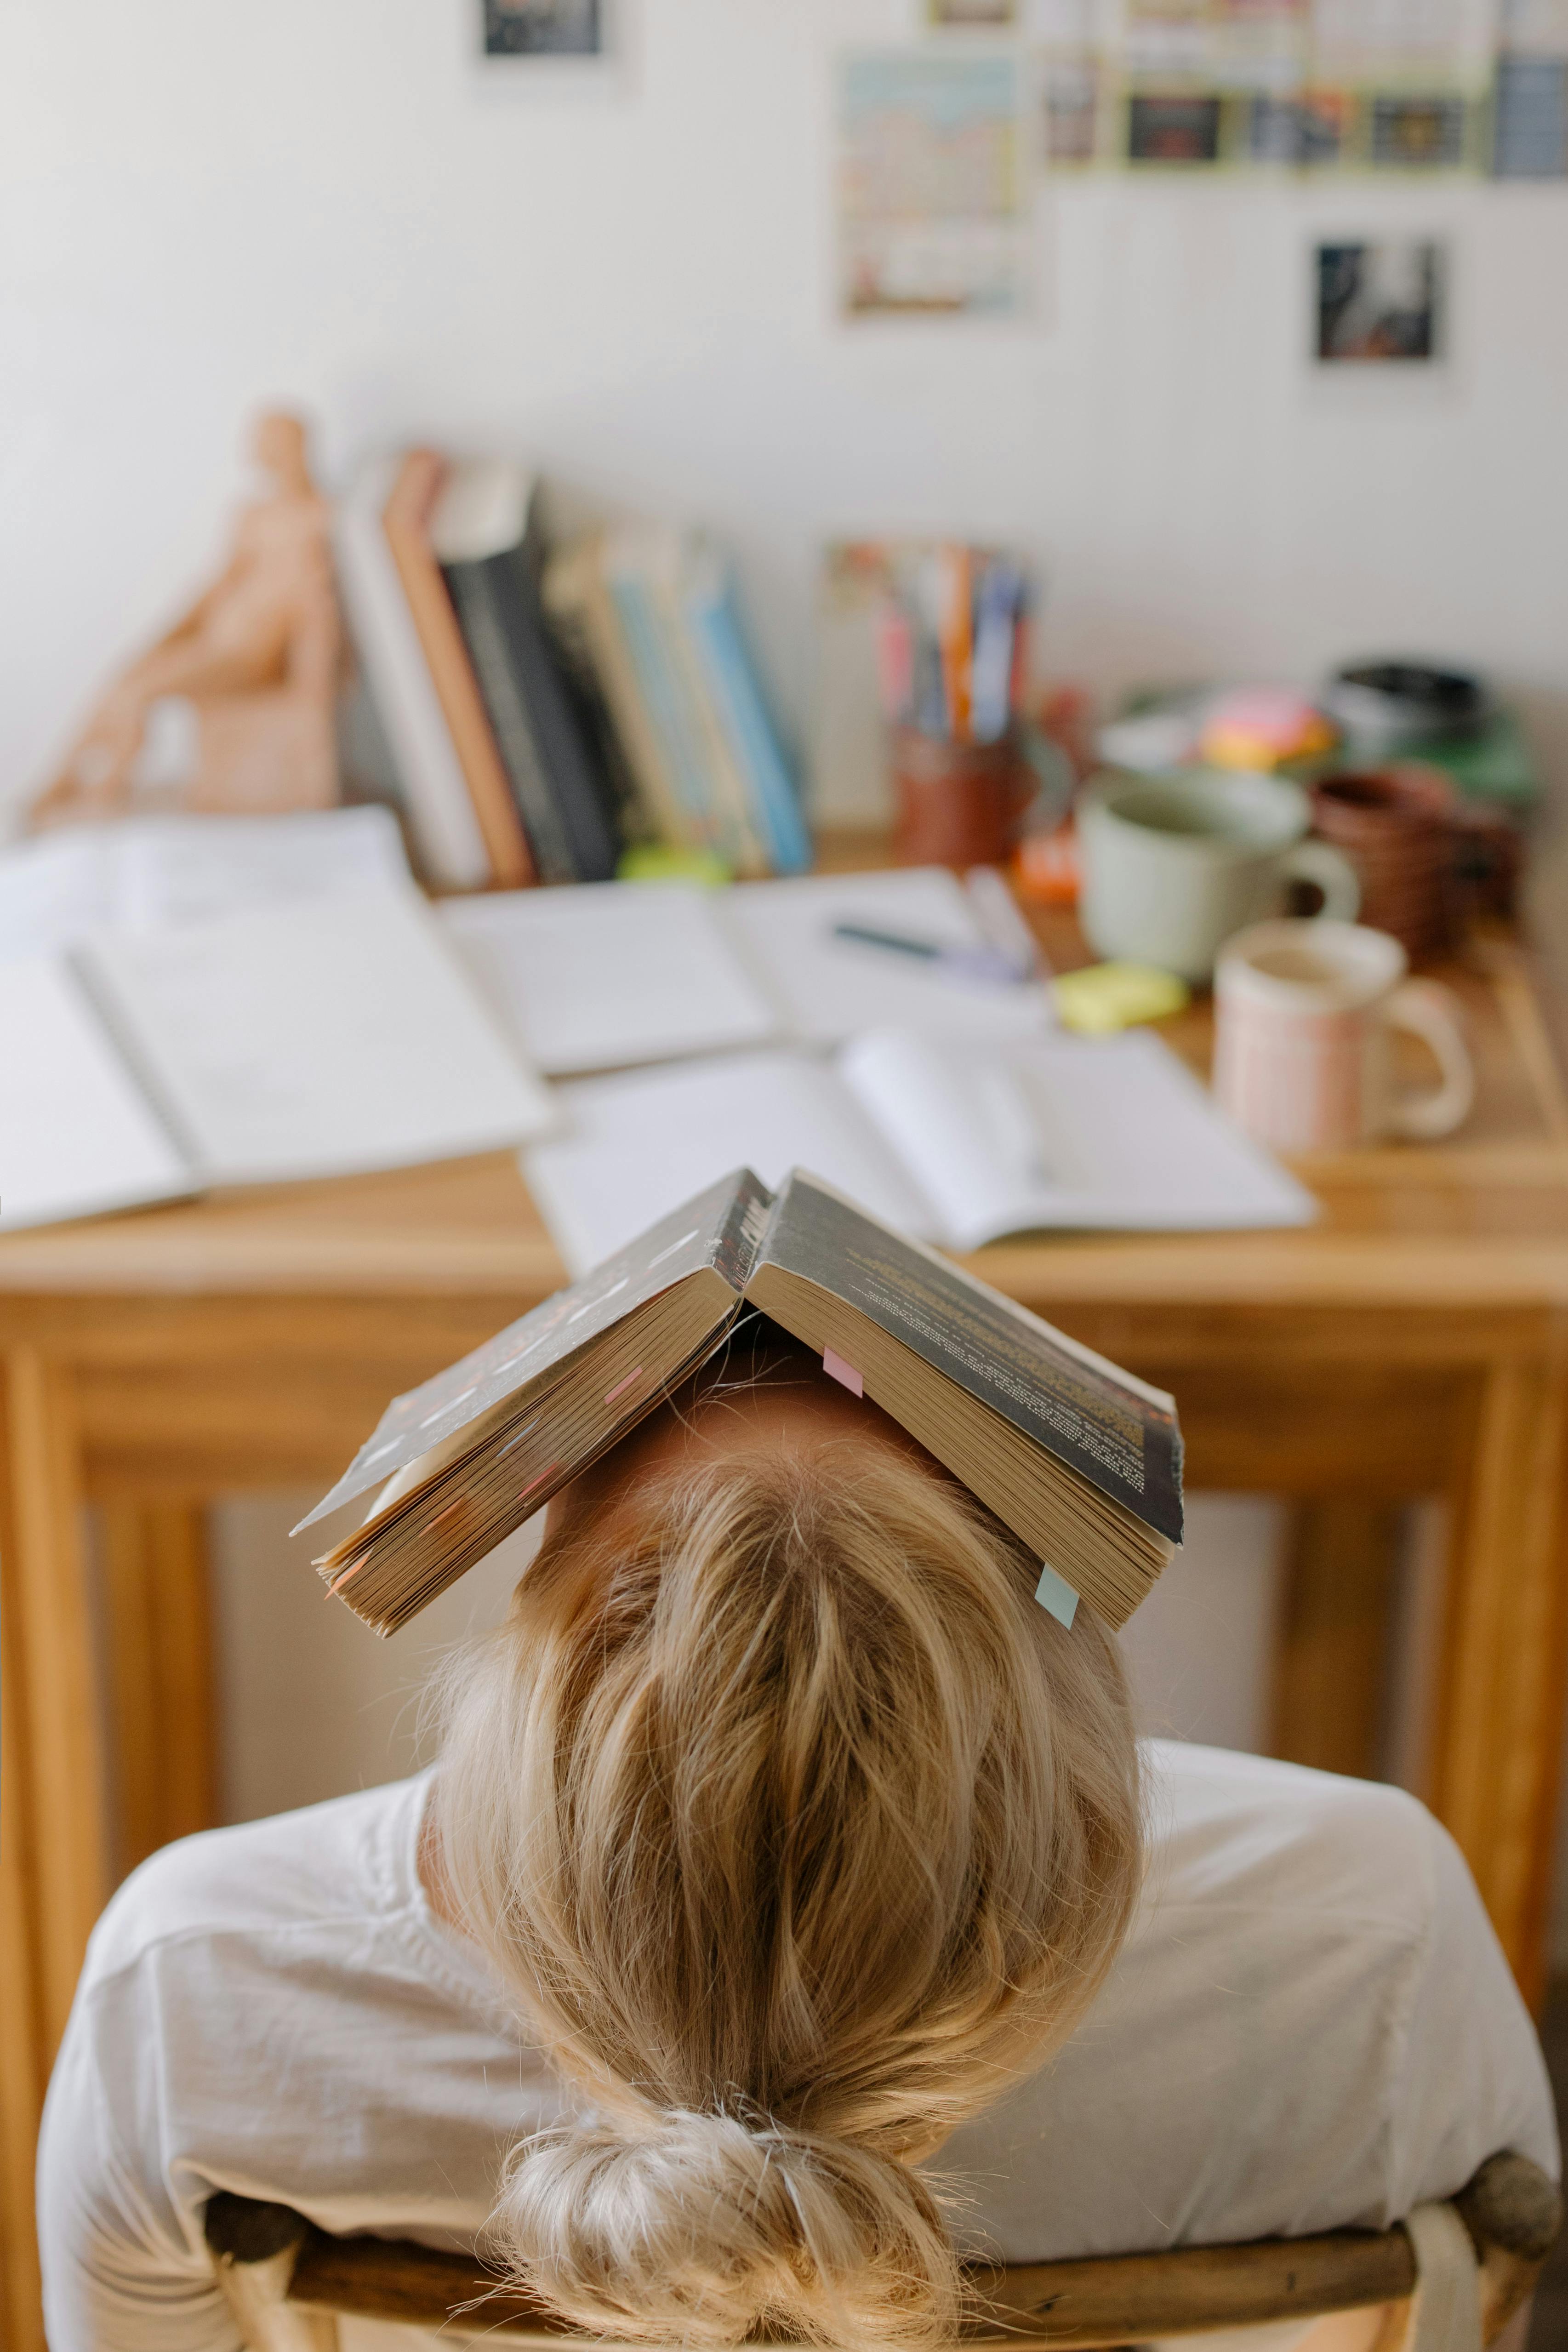 A tired student with a book | Source: Pexels